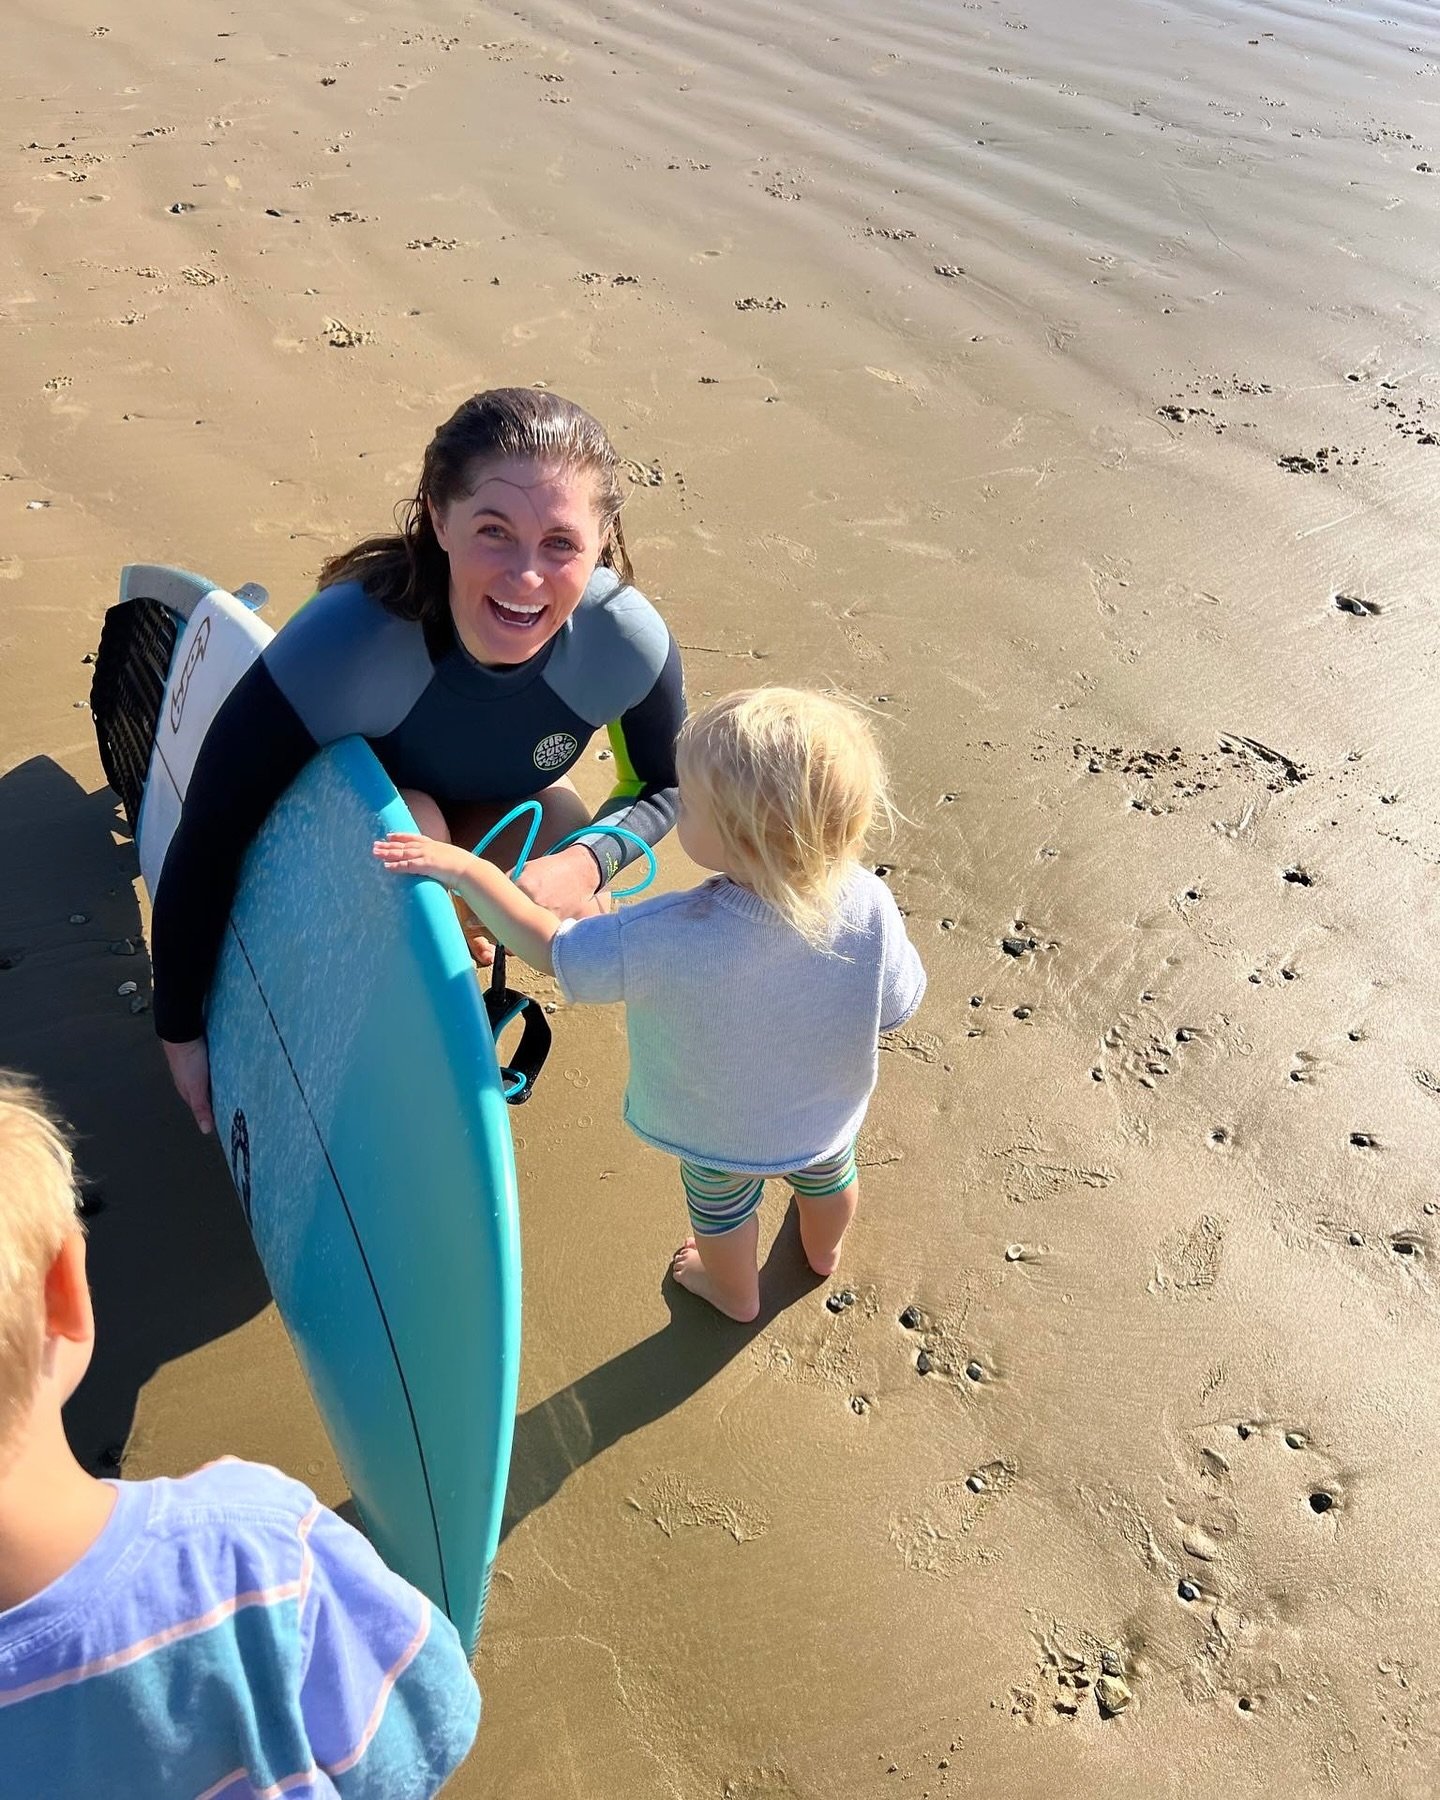 Being a mum is HUGE! 

Between the chaos of mum life &ndash; the laundry mountains, the endless to-do lists, sleepless nights, the mess, the noise. Trying to be everything to everyone, hormones, the mental load, the long days, the meltdowns (I&rsquo;